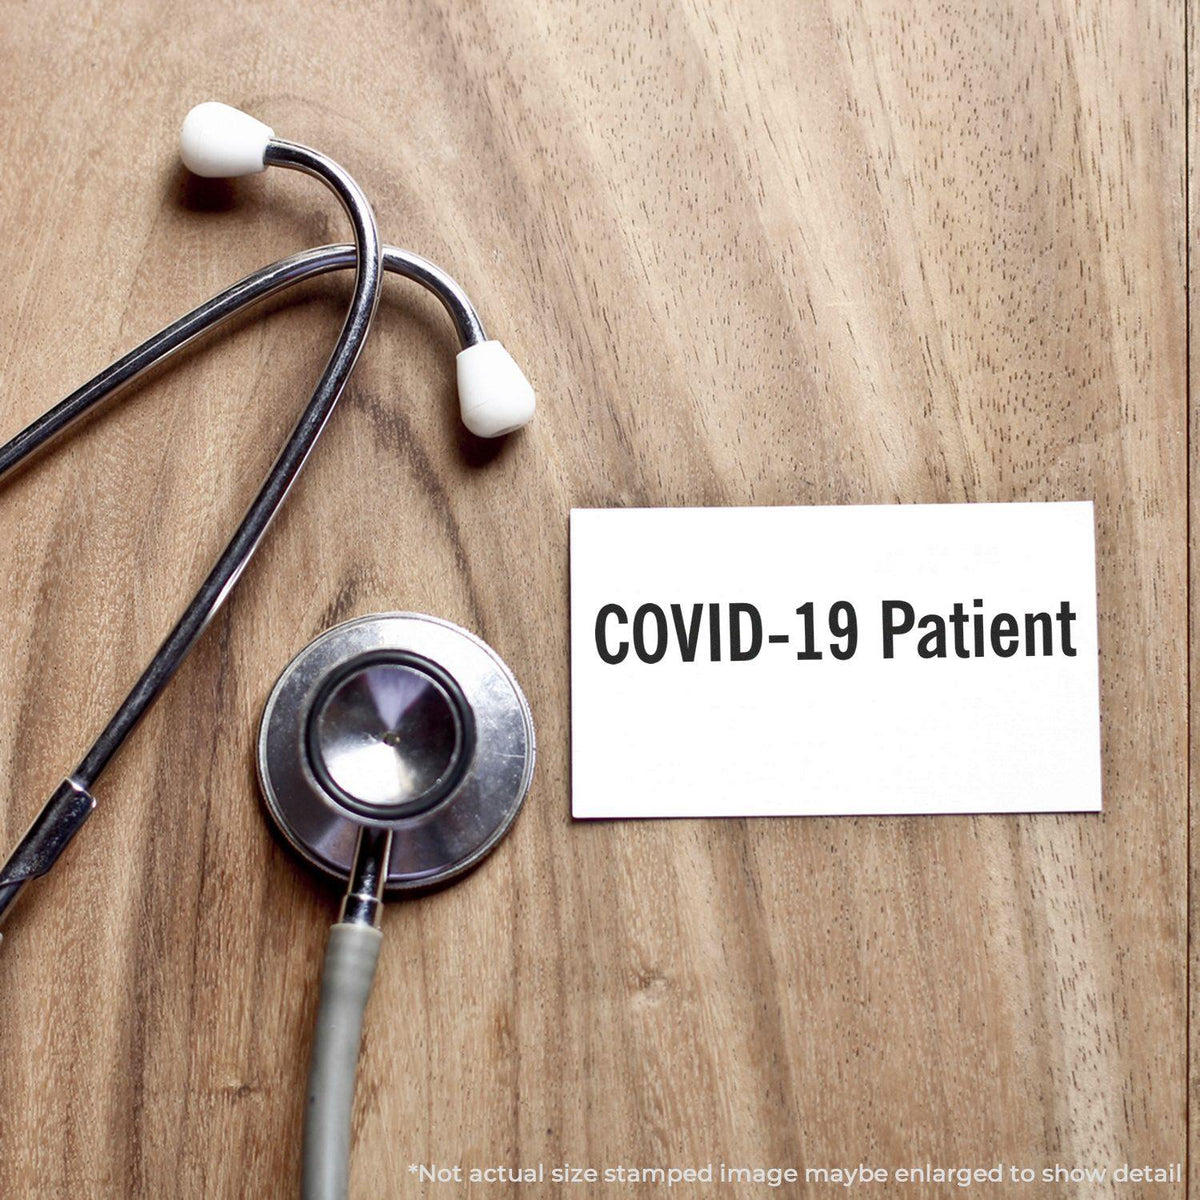 In Use Large Pre-Inked Covid-19 Patient Stamp Image